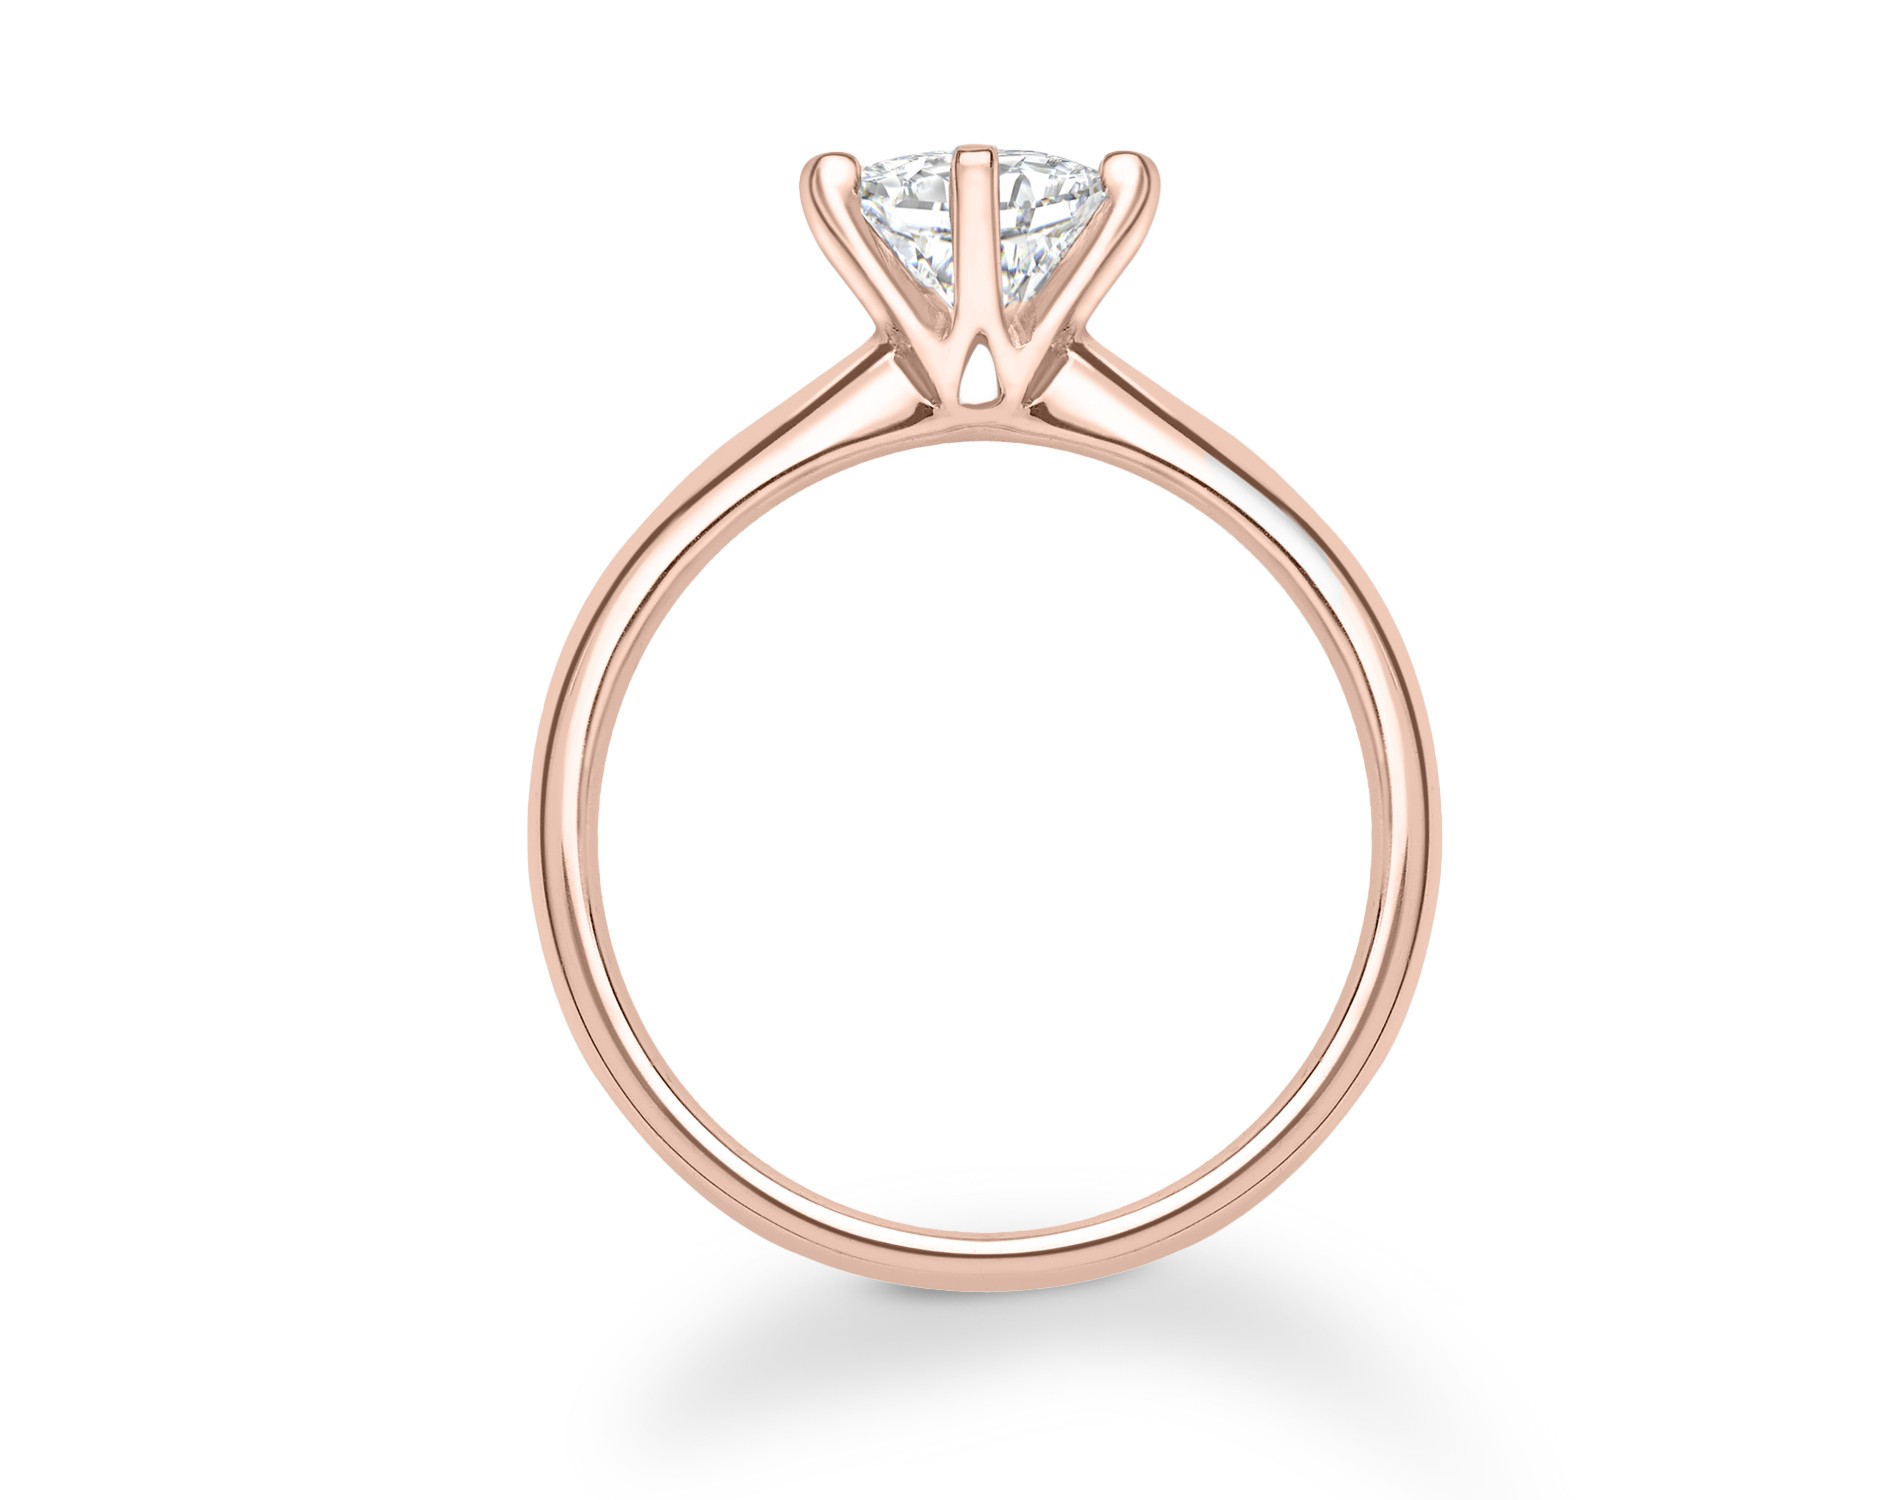 18K ROSE GOLD 6 PRONGS SOLITAIRE ROUND CUT DIAMOND ENGAGEMENT RING